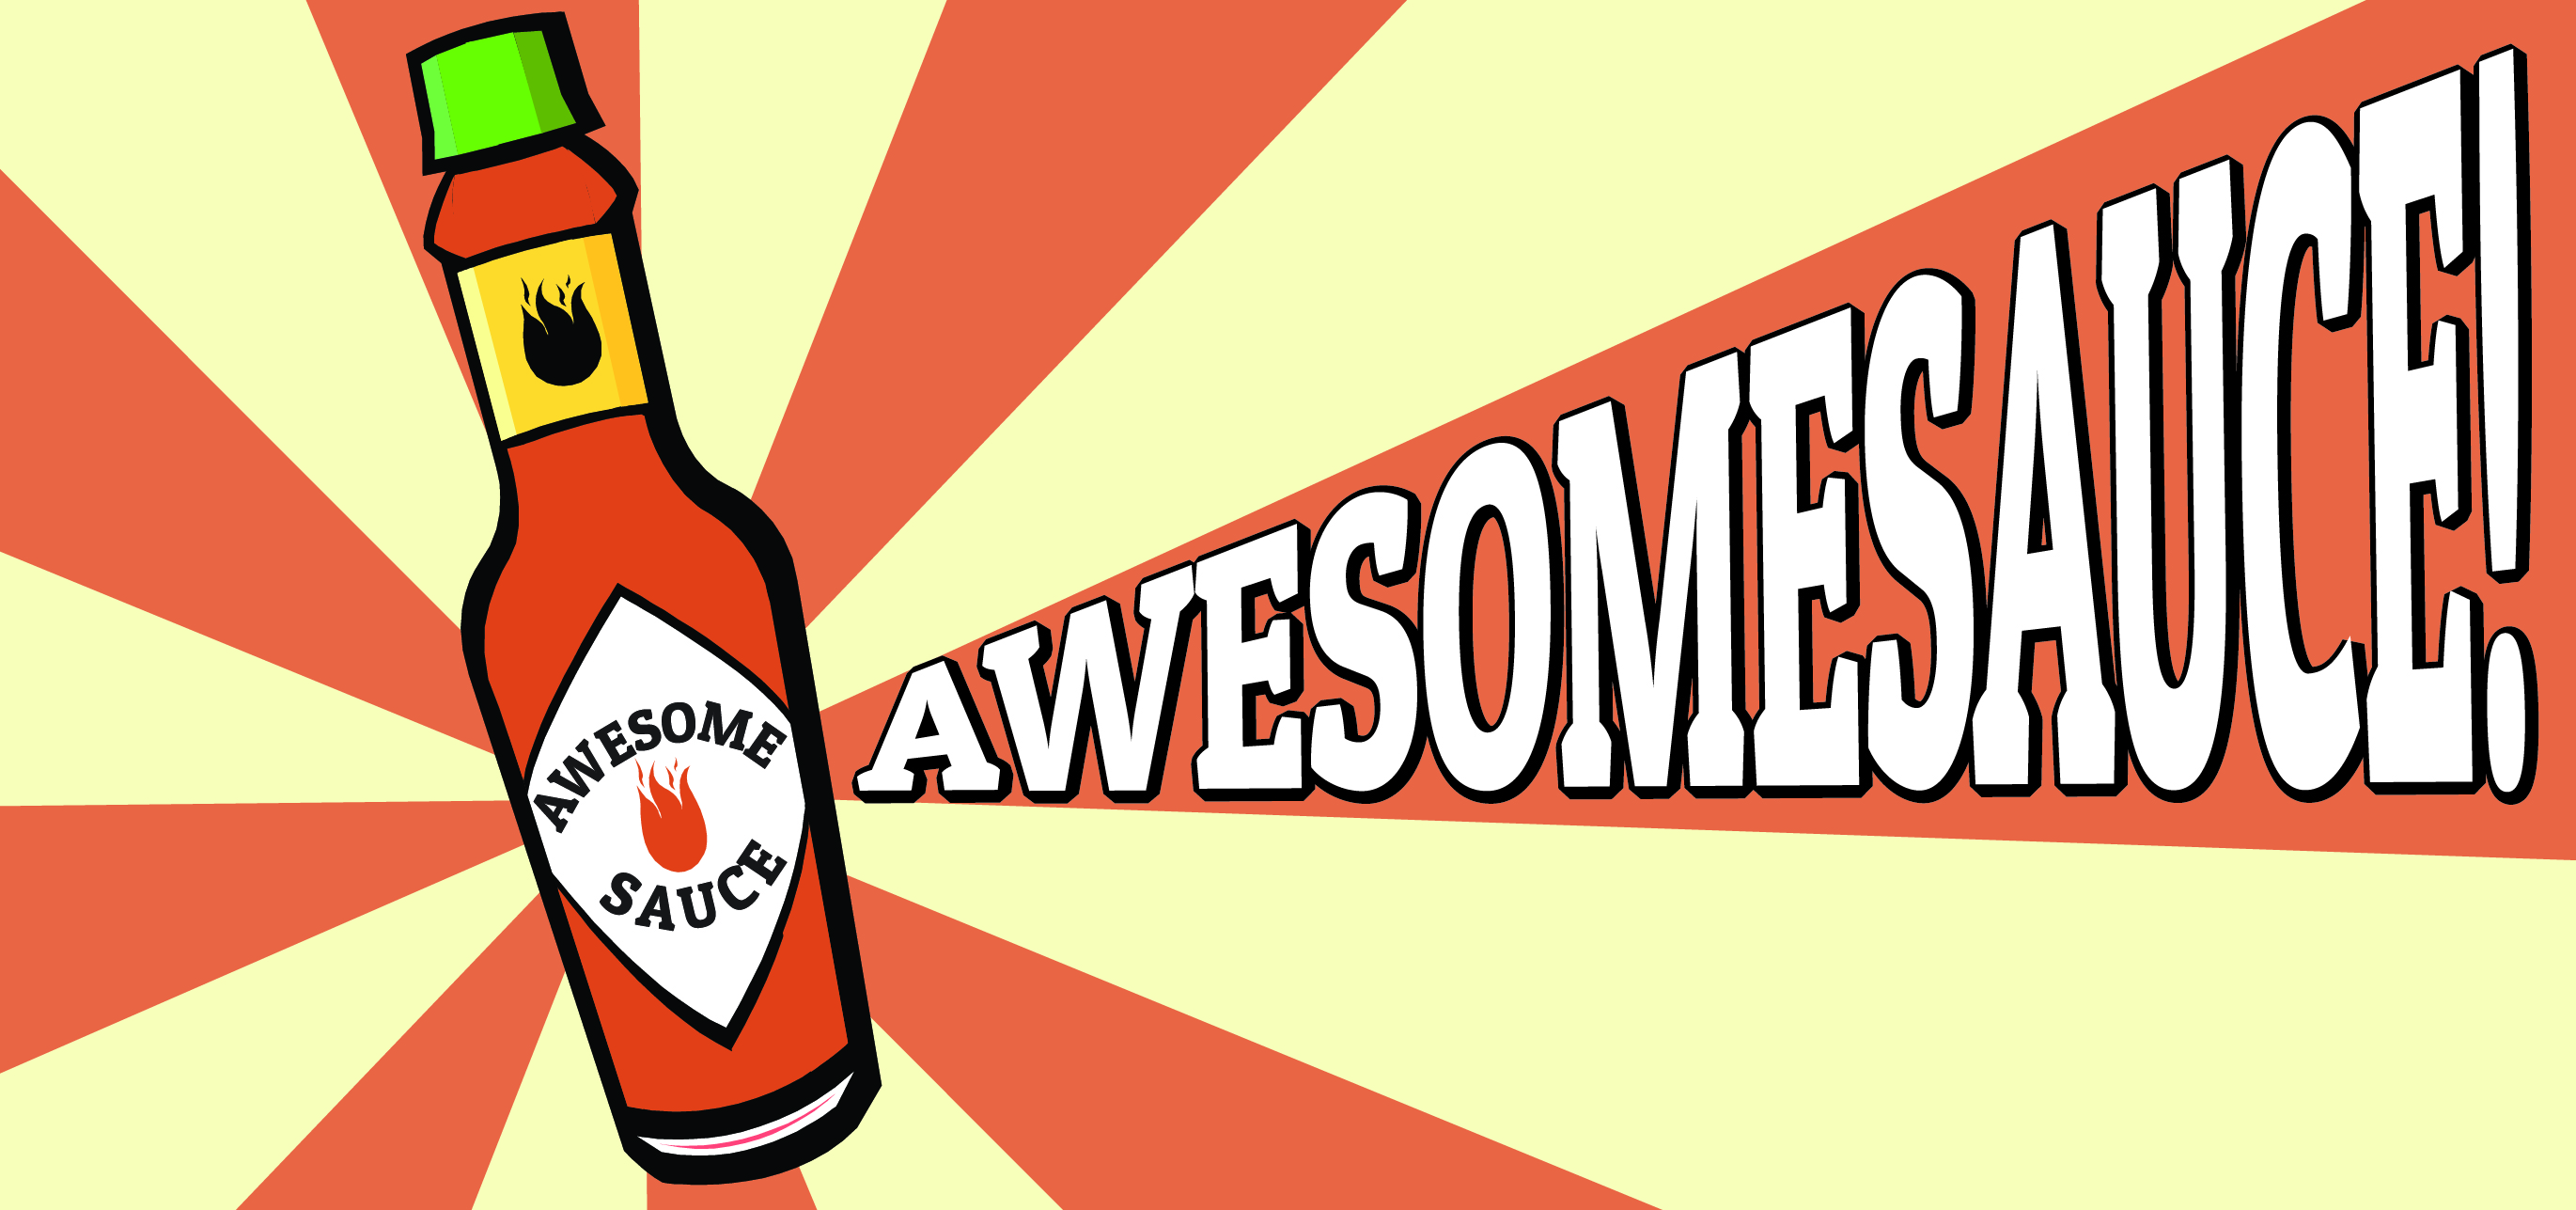 Awesomesauce – Roadtrippers